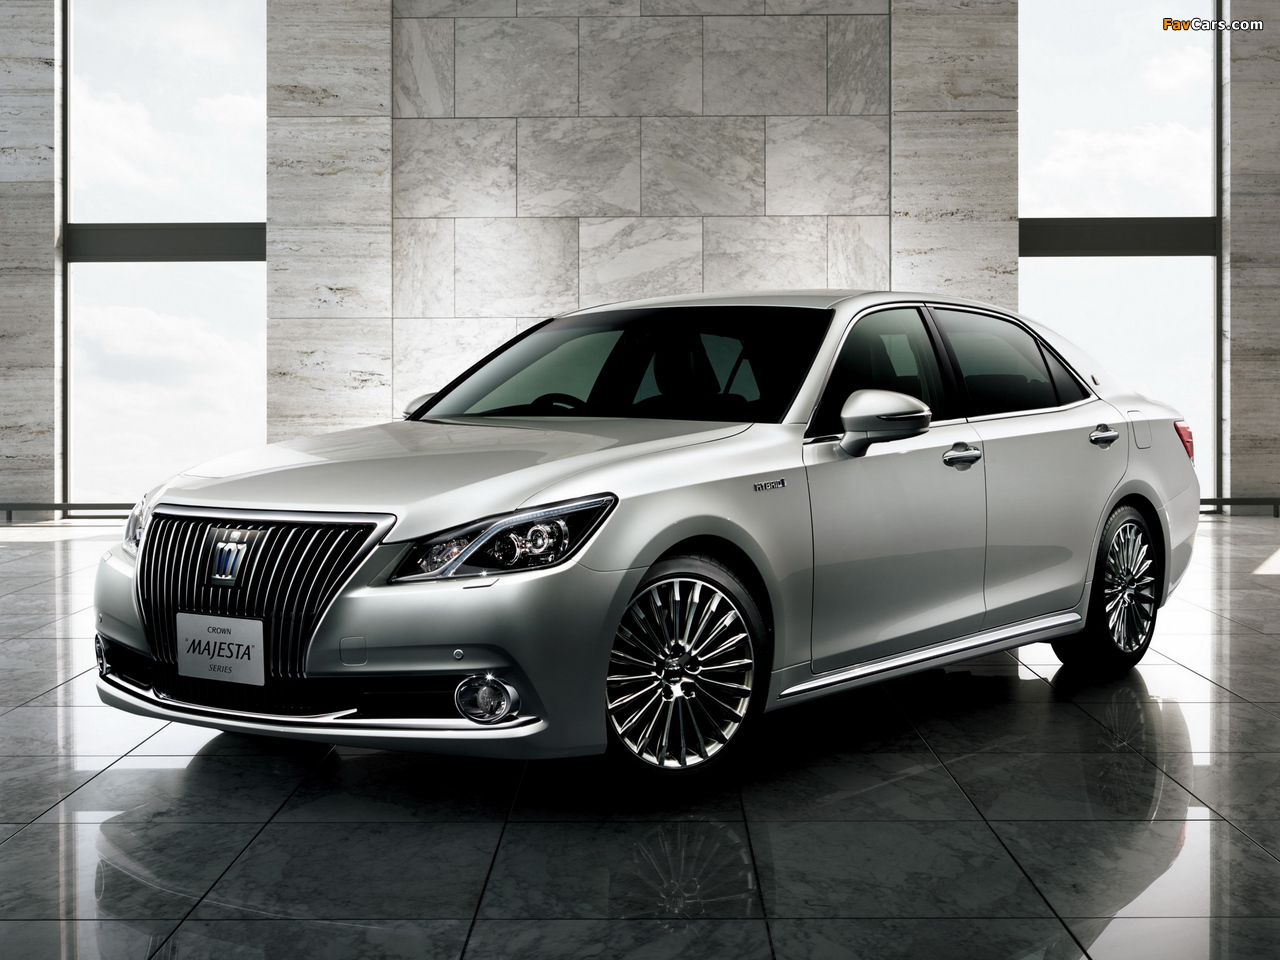 Toyota Crown Majesta (S210) 2013 pictures (1280 x 960)